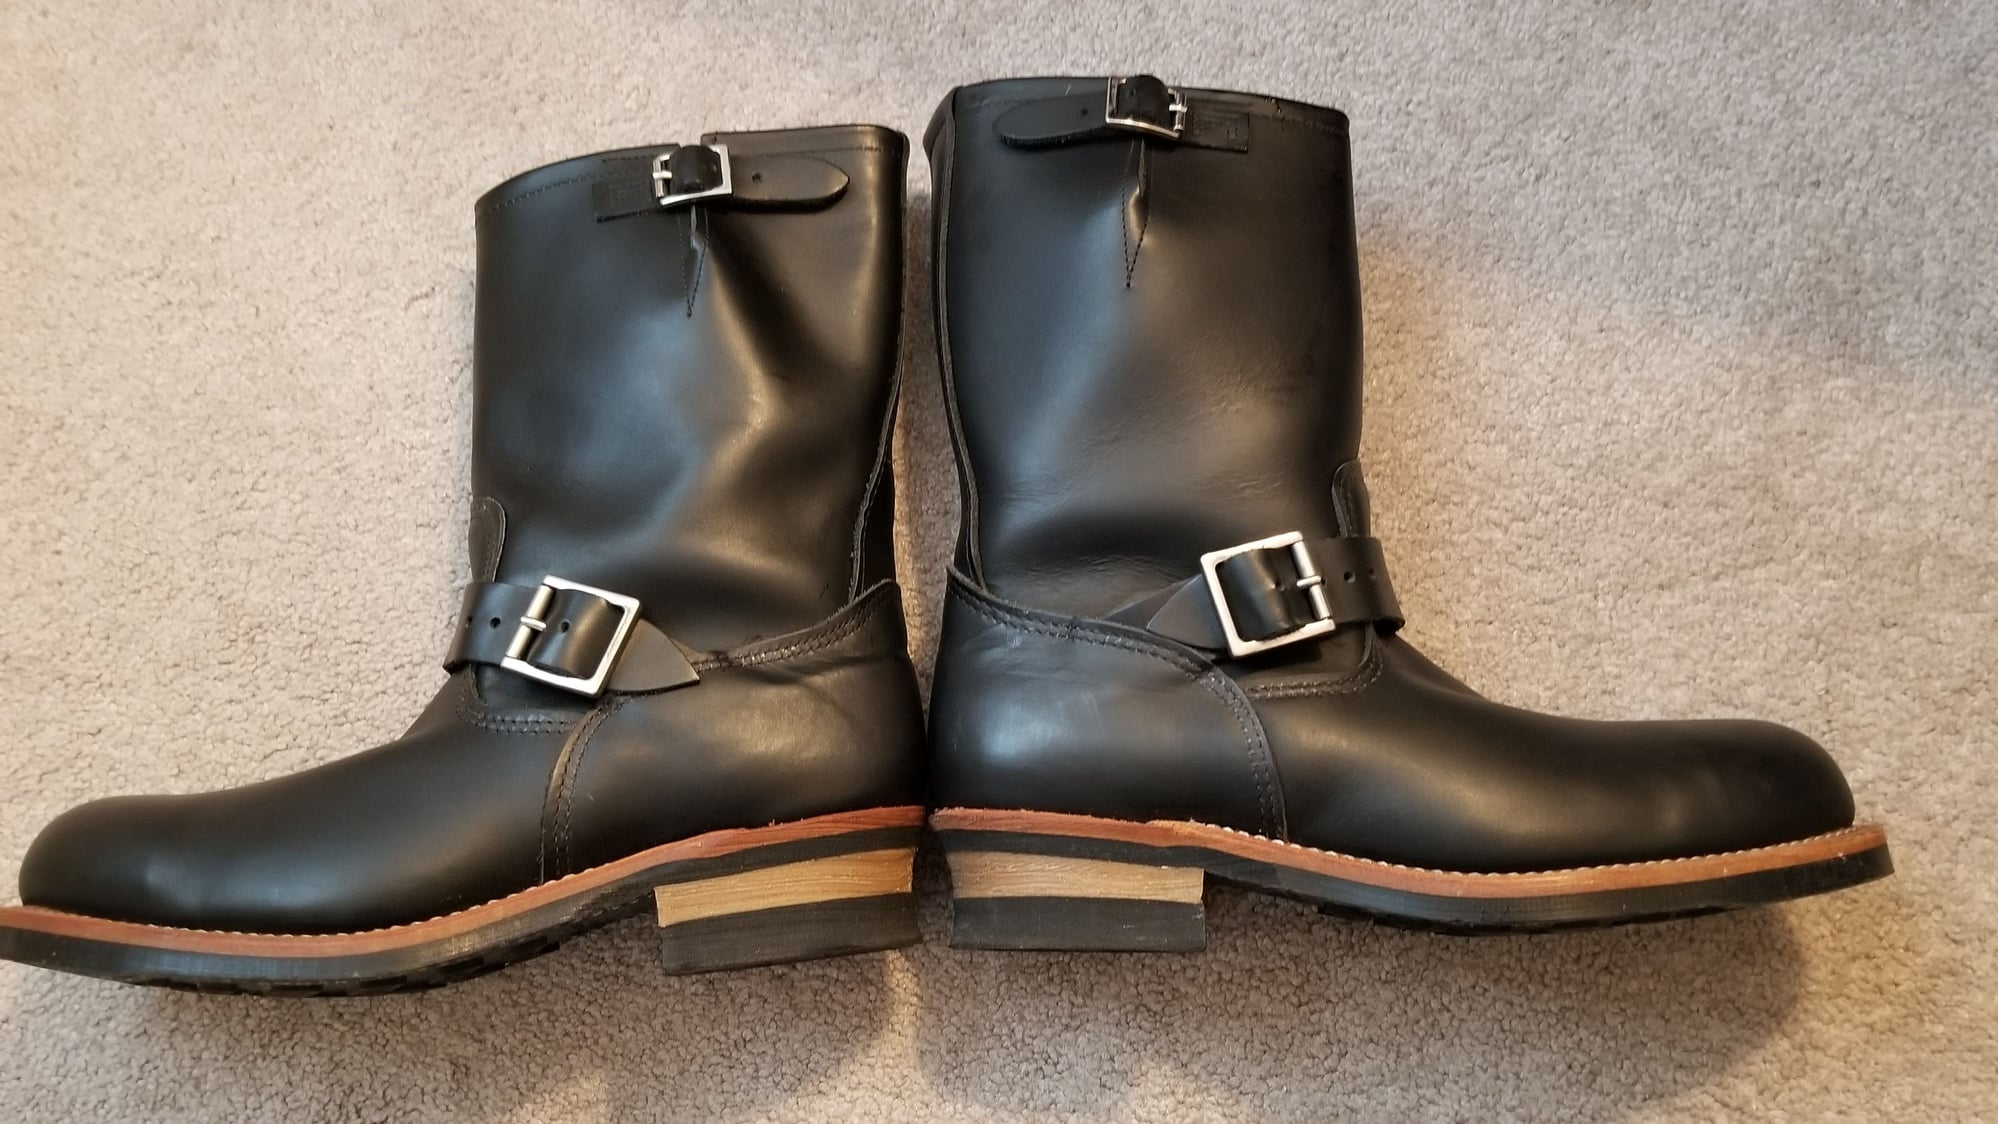 Red Wing Engineers boots 2268 size 10-2e - Harley Davidson Forums